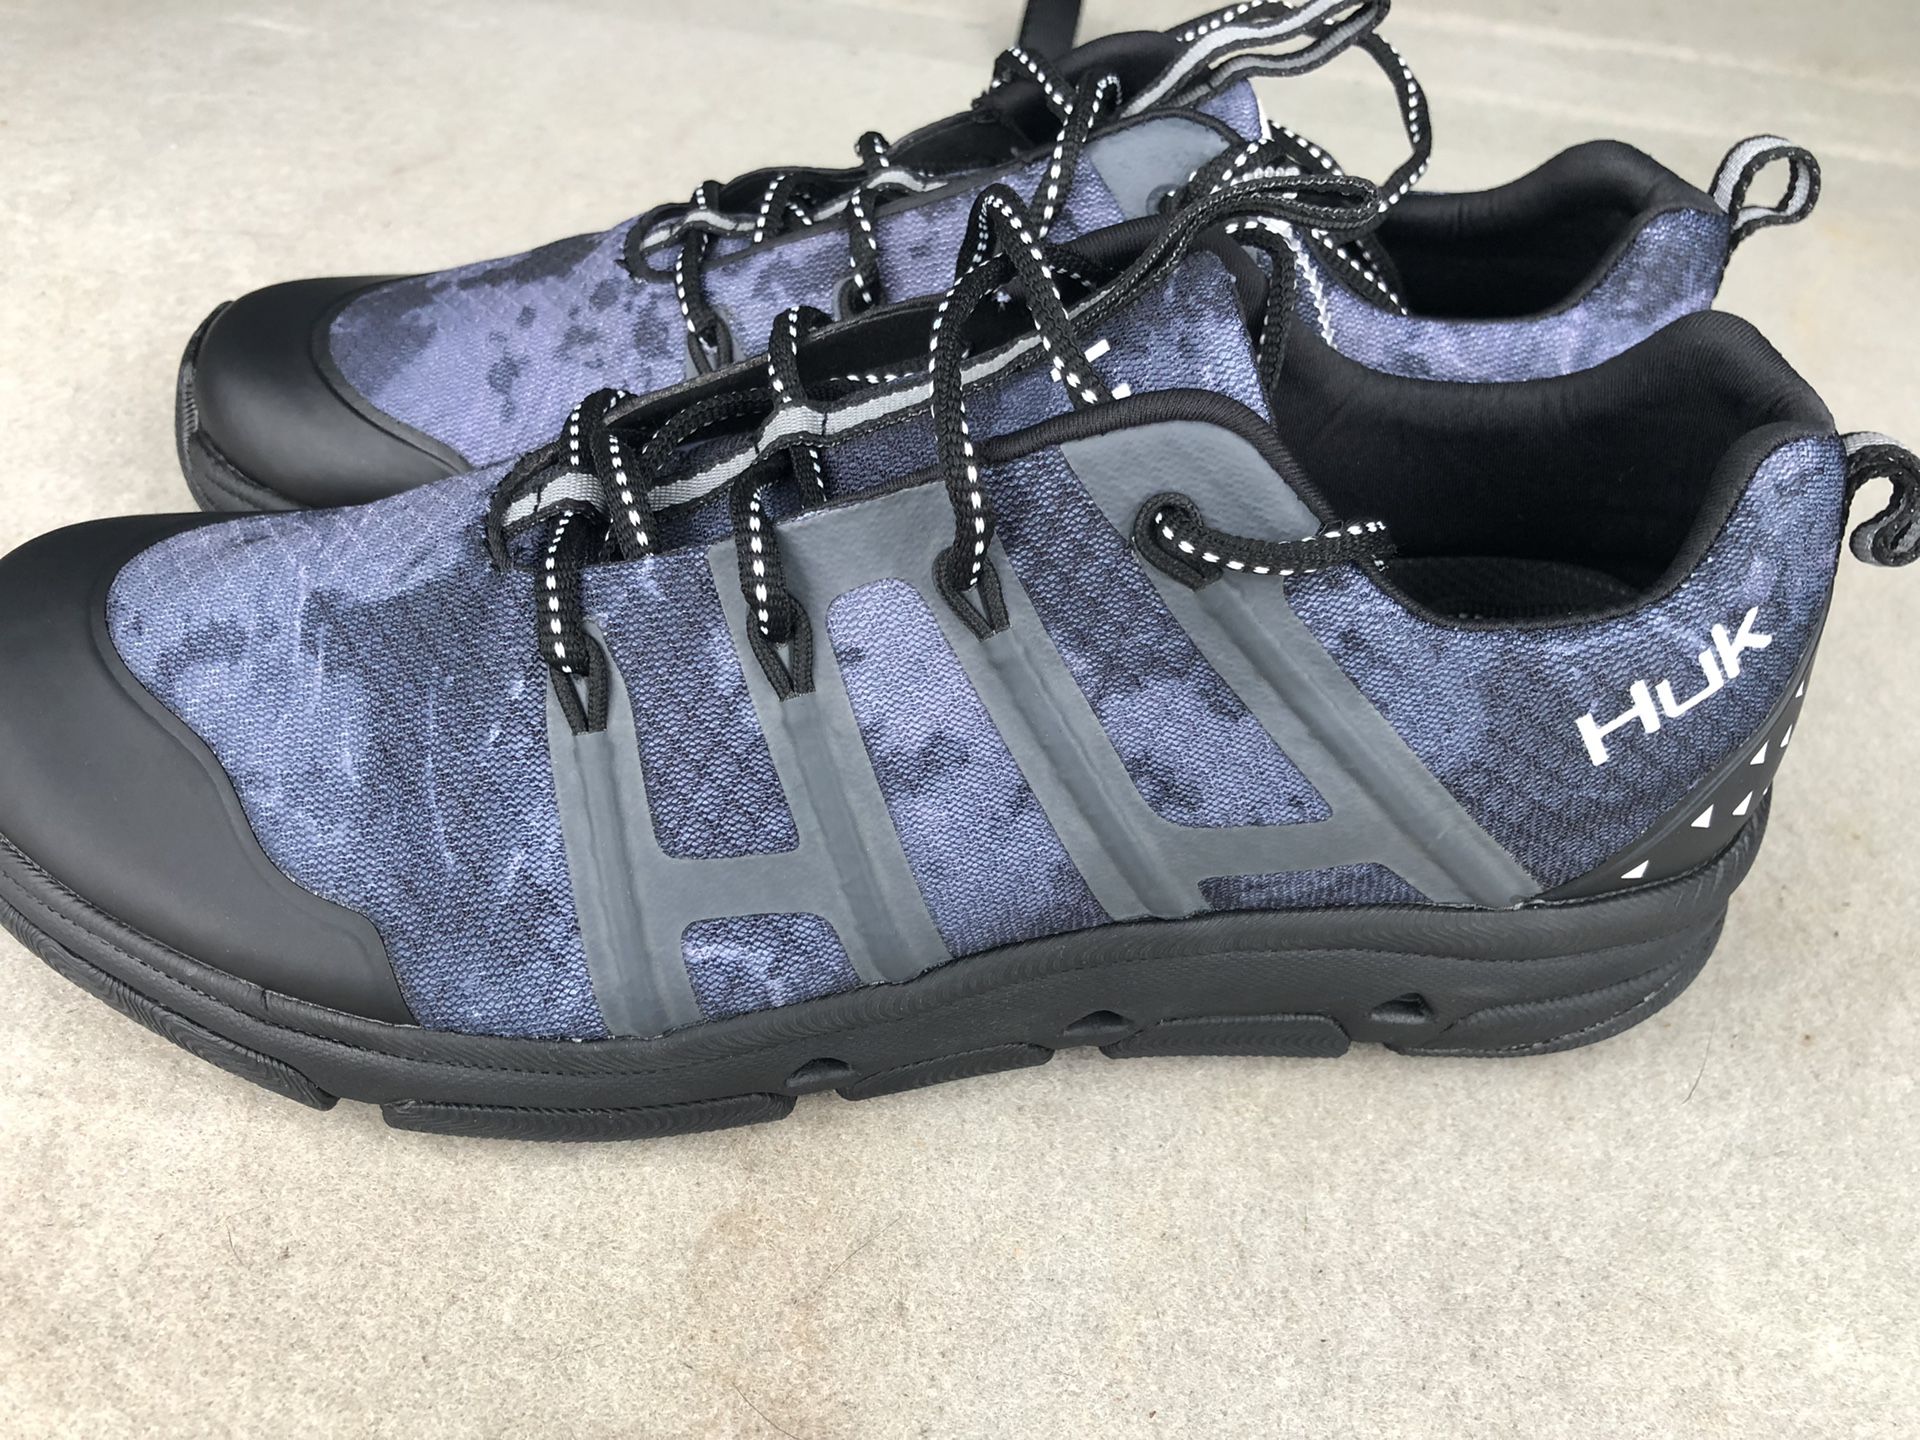 Brand New HUK Outrigger Fishing Shoes Sz:9.5